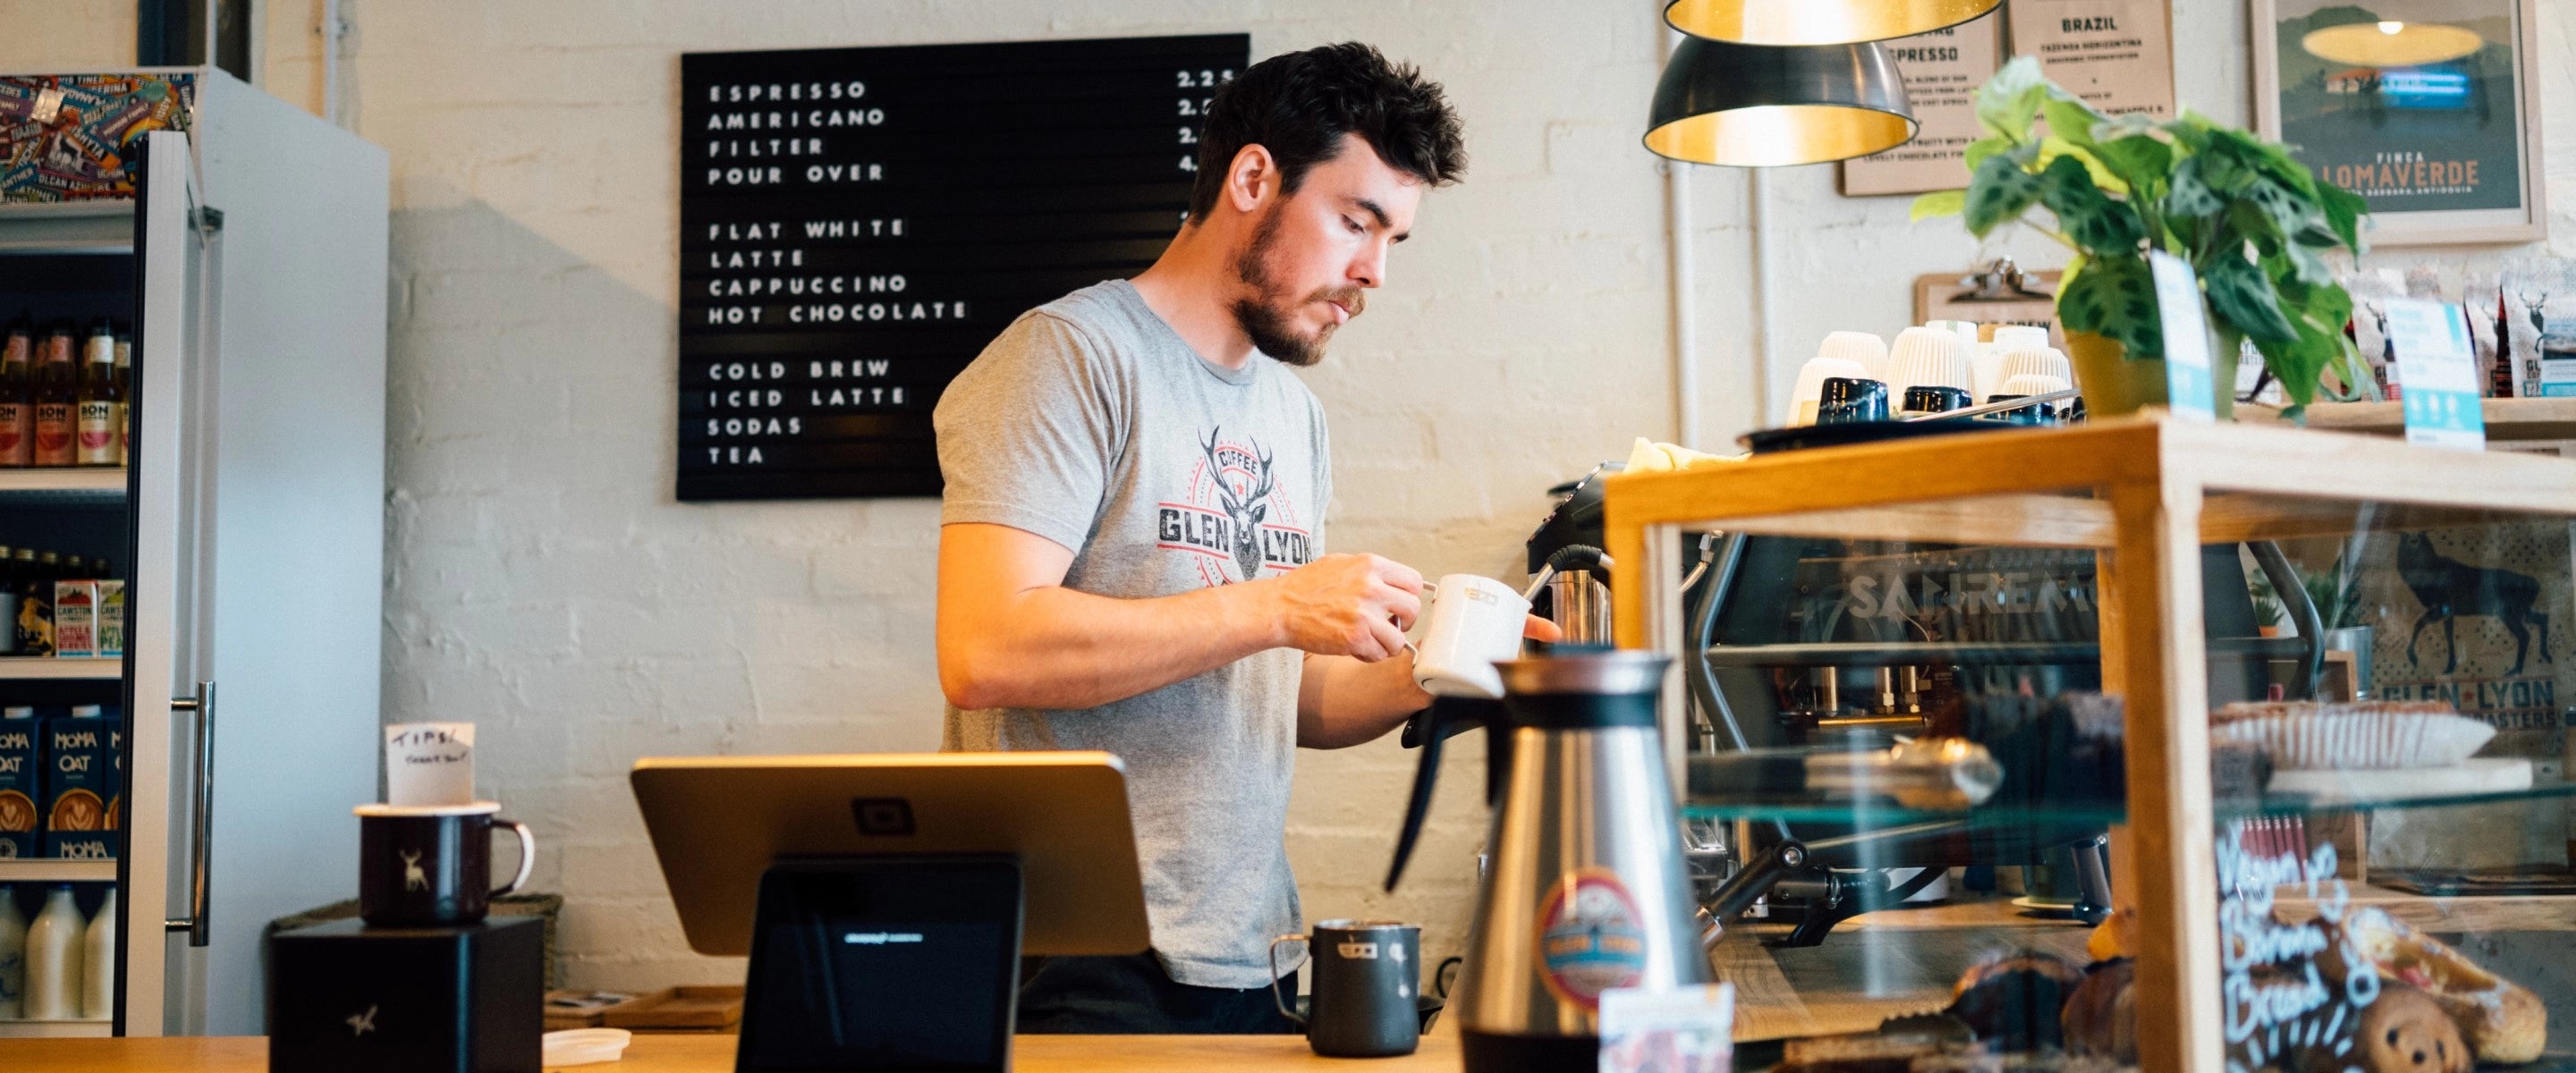 A banner image of a barista working behind the bar at the Glen Lyon Coffee speciality roastery cafe